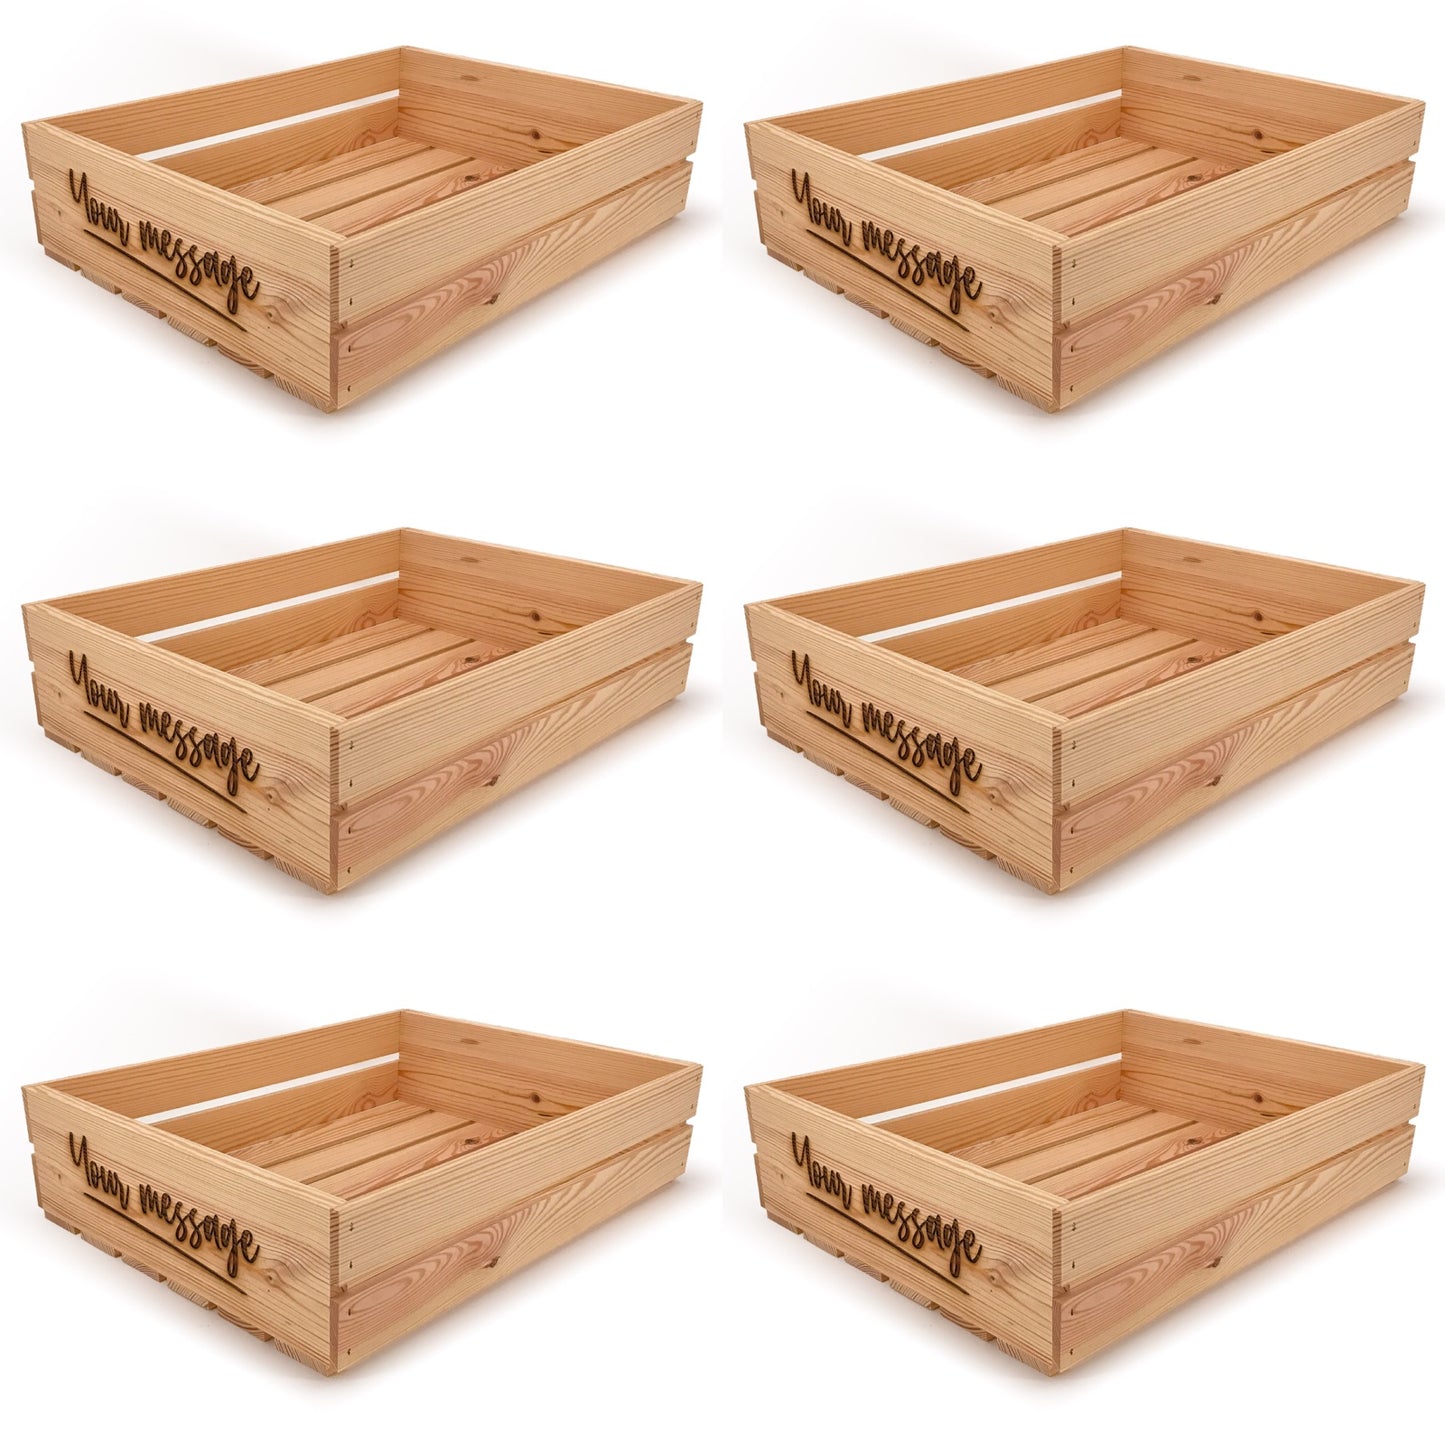 6 Small wooden crates with custom message 22x17x5.25, 6-WS-22-17-5.25-ST-NW-NL, 12-WS-22-17-5.25-ST-NW-NL, 24-WS-22-17-5.25-ST-NW-NL, 48-WS-22-17-5.25-ST-NW-NL, 96-WS-22-17-5.25-ST-NW-NL